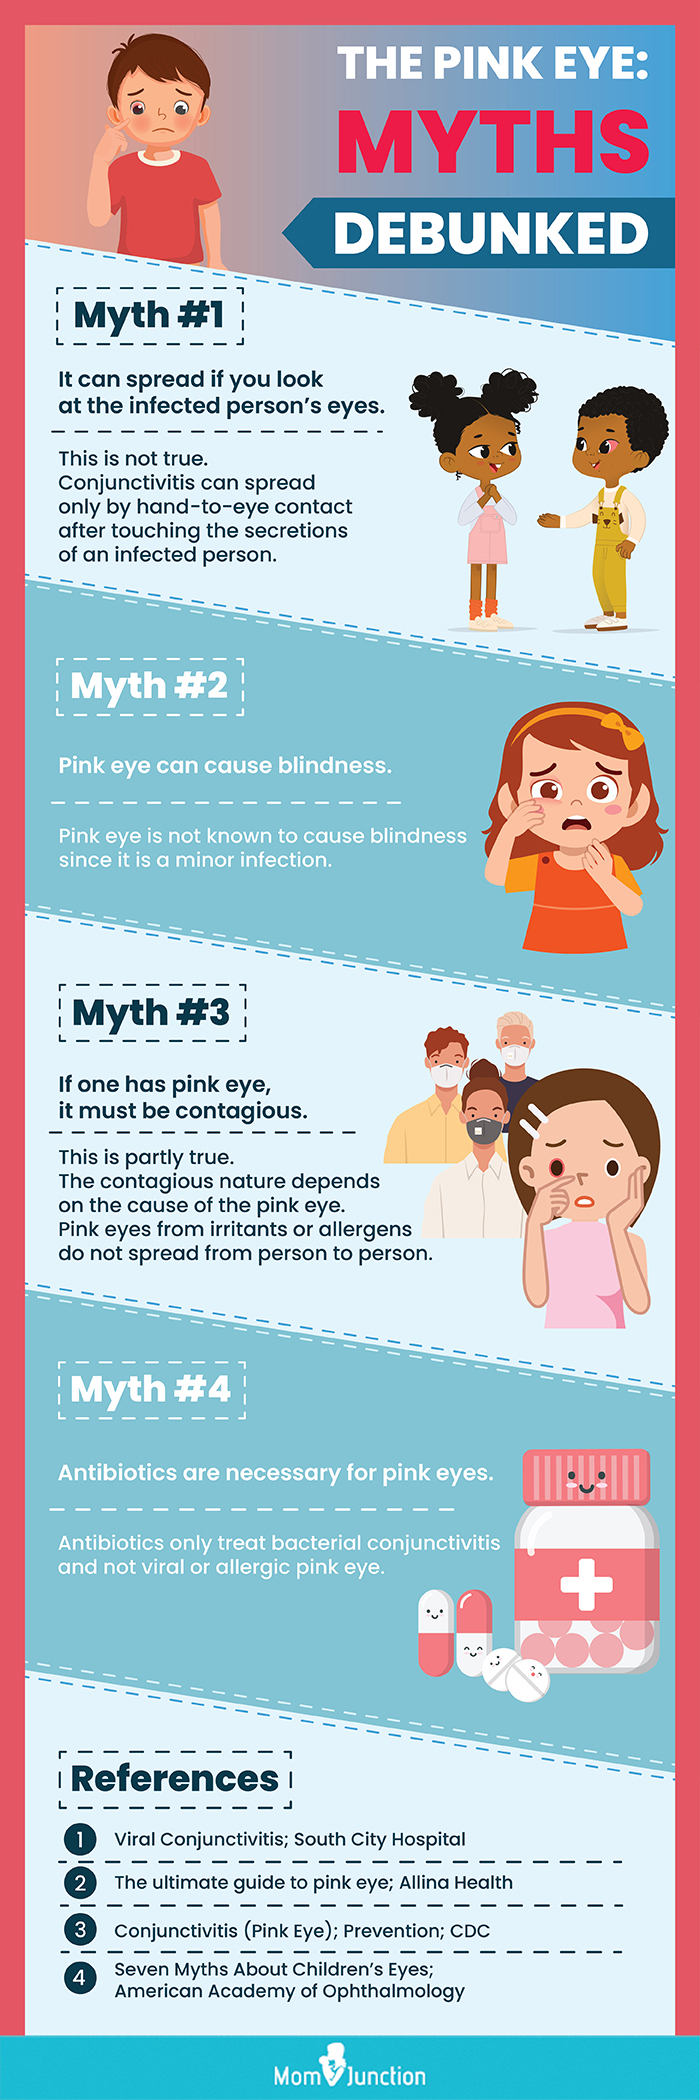 the pink eye myths debunked (infographic)